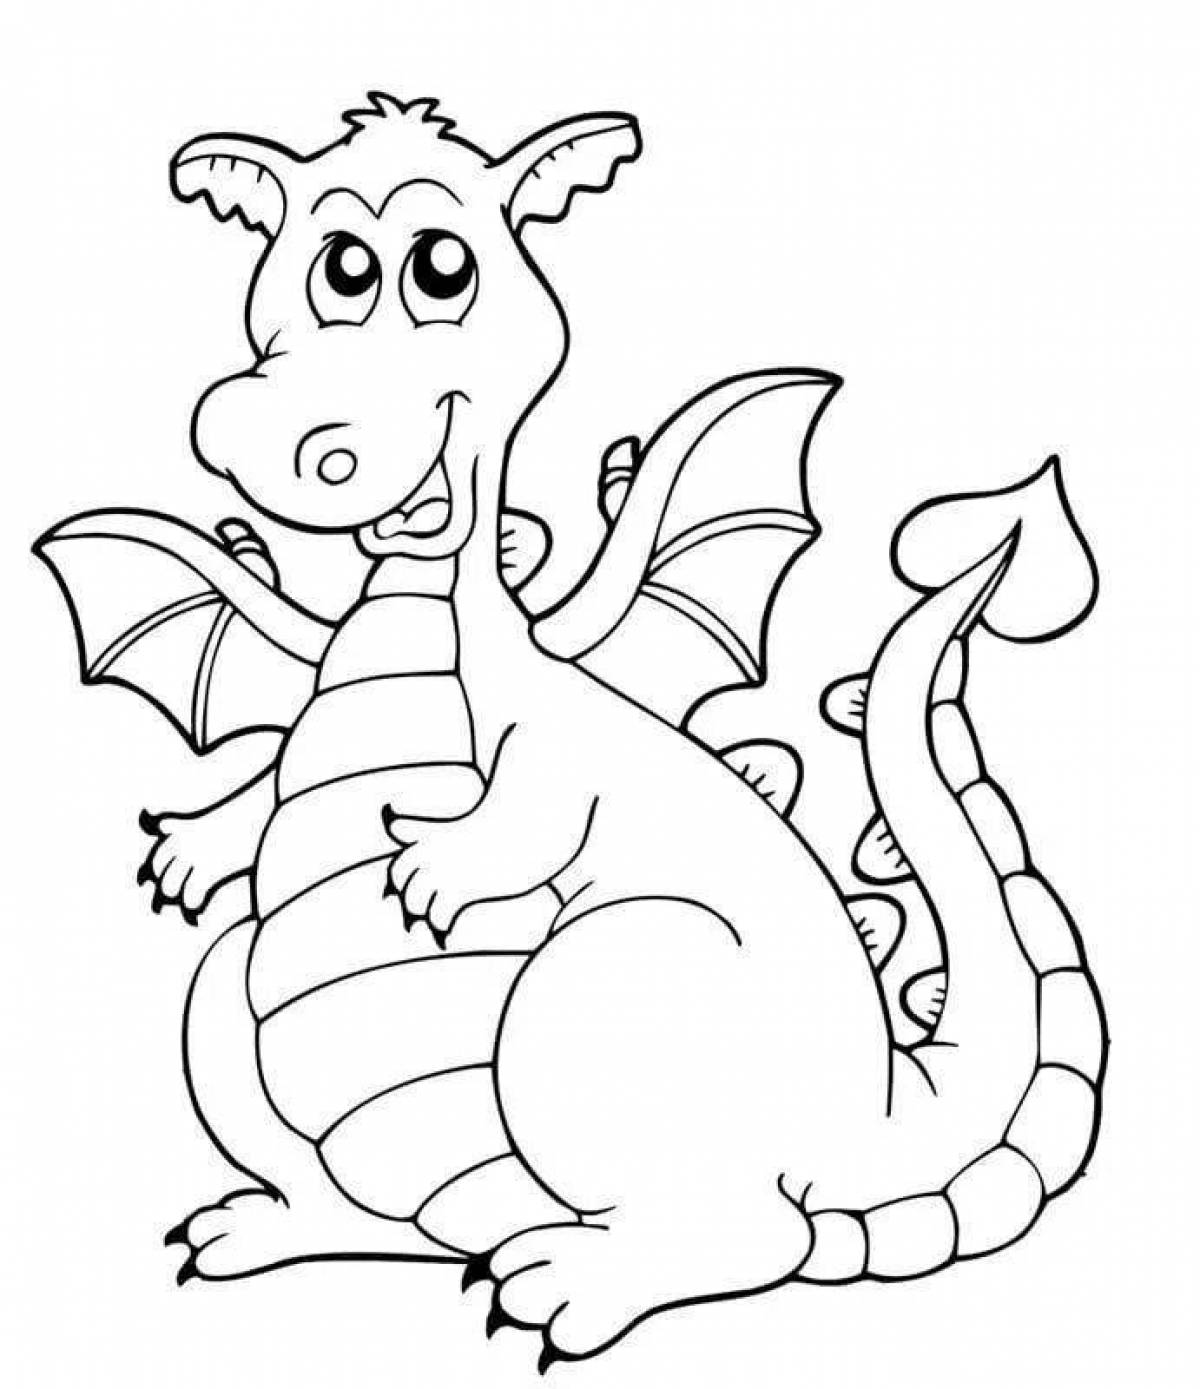 Exquisite dragon coloring book for kids